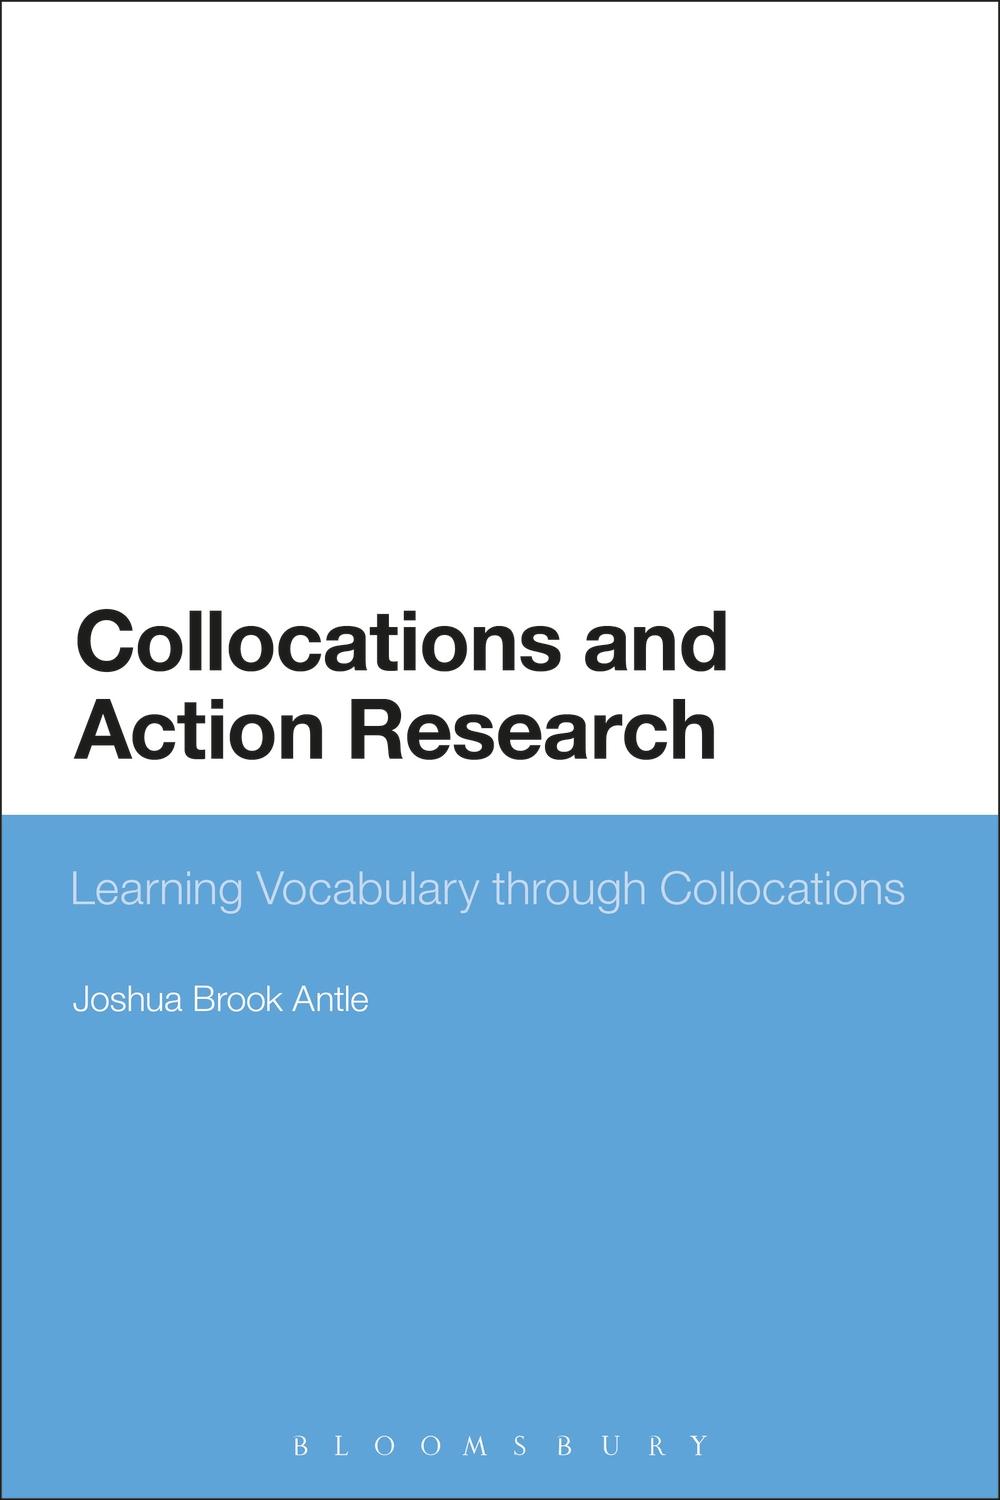 Collocations and Action Research - Joshua Brook Antle